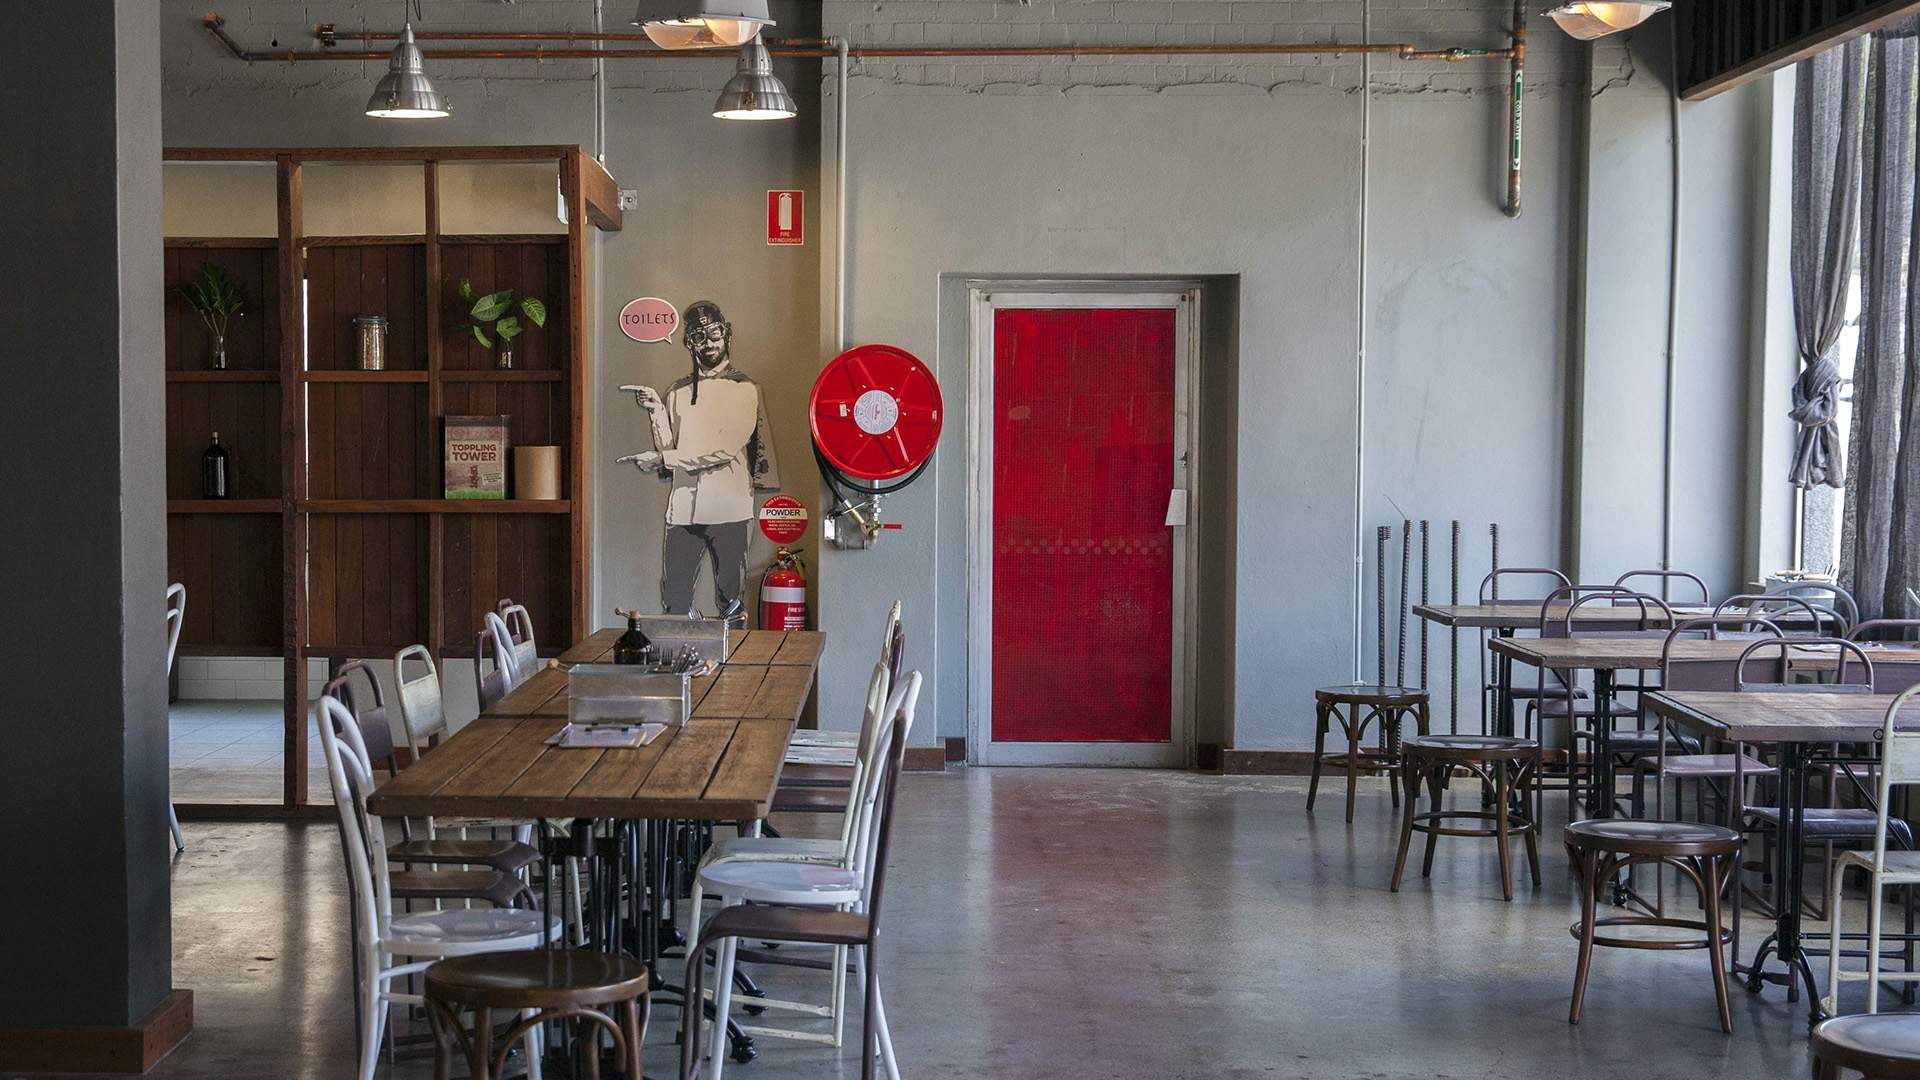 Soapbox Beer Is the New Independent Craft Brewery and Taproom in the Heart of Fortitude Valley